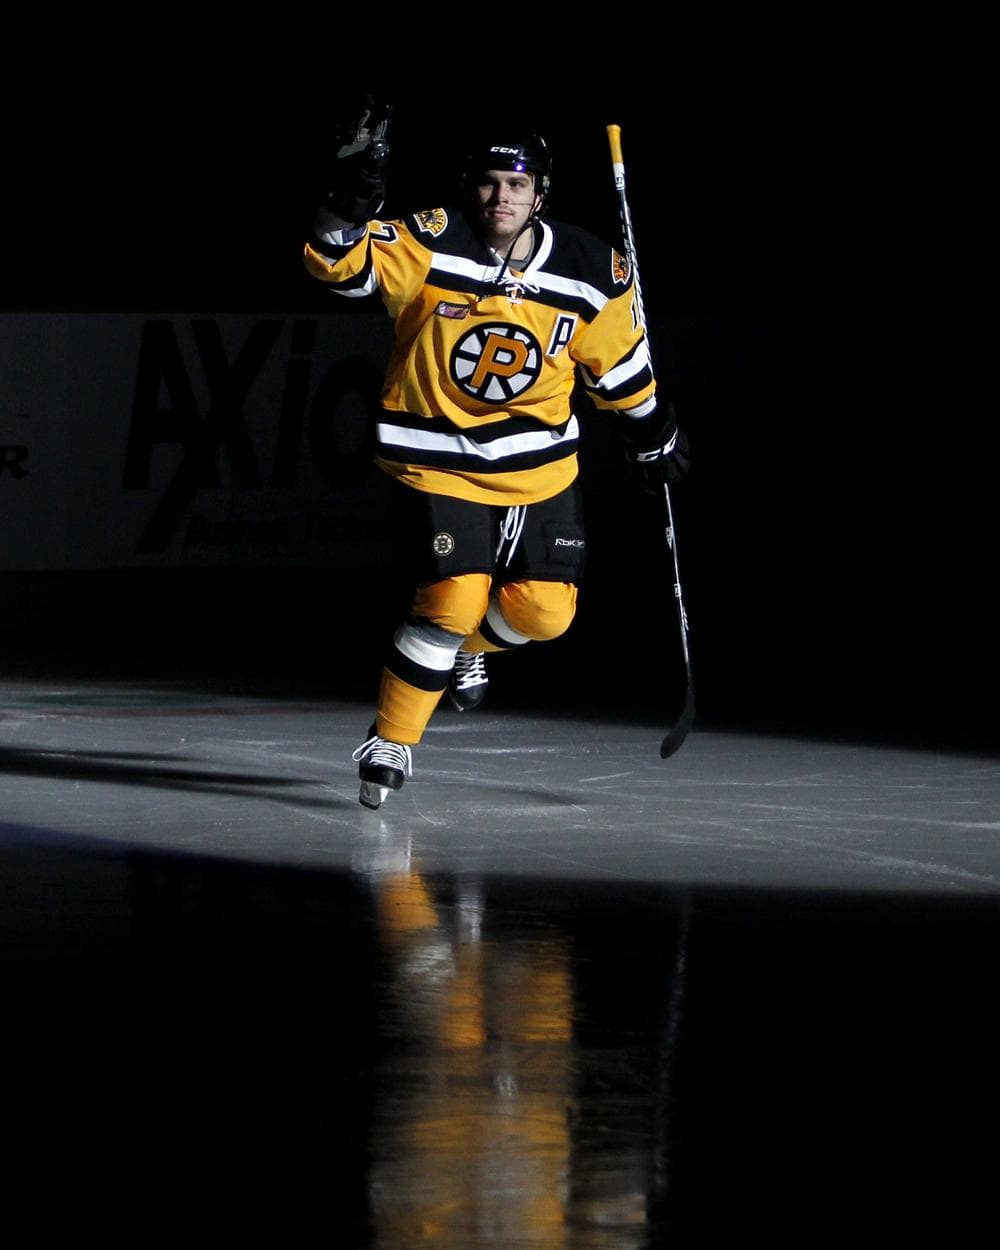 Chris Bourque is in the spotlight for the AHL's Providence Bruins, but he's hoping to see the brighter lights of the NHL. (Photo courtesy of Alan Sullivan)